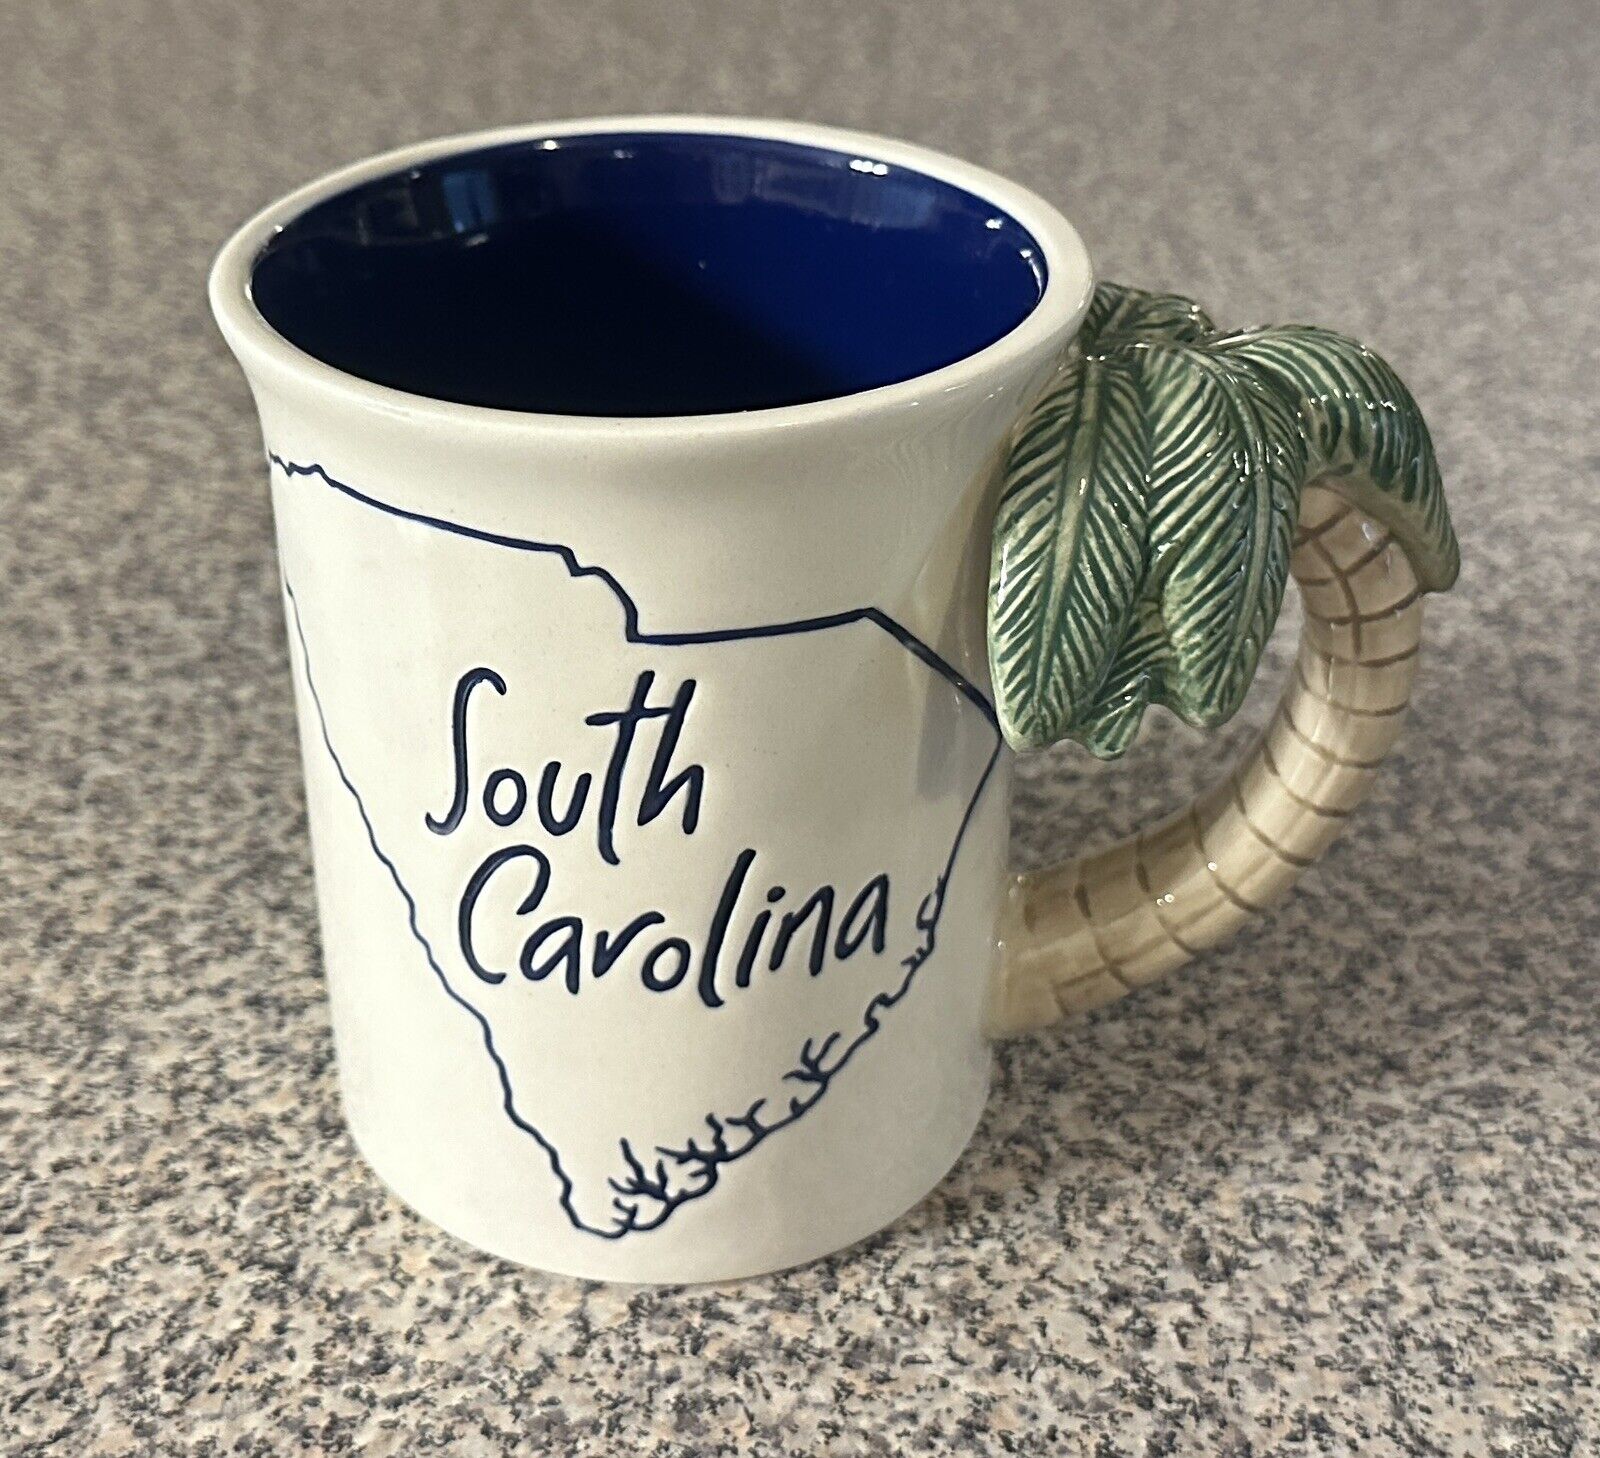 South Carolina Mug Cup With Palm Tree Handle Dark Blue Inside By Our Name Is Mud